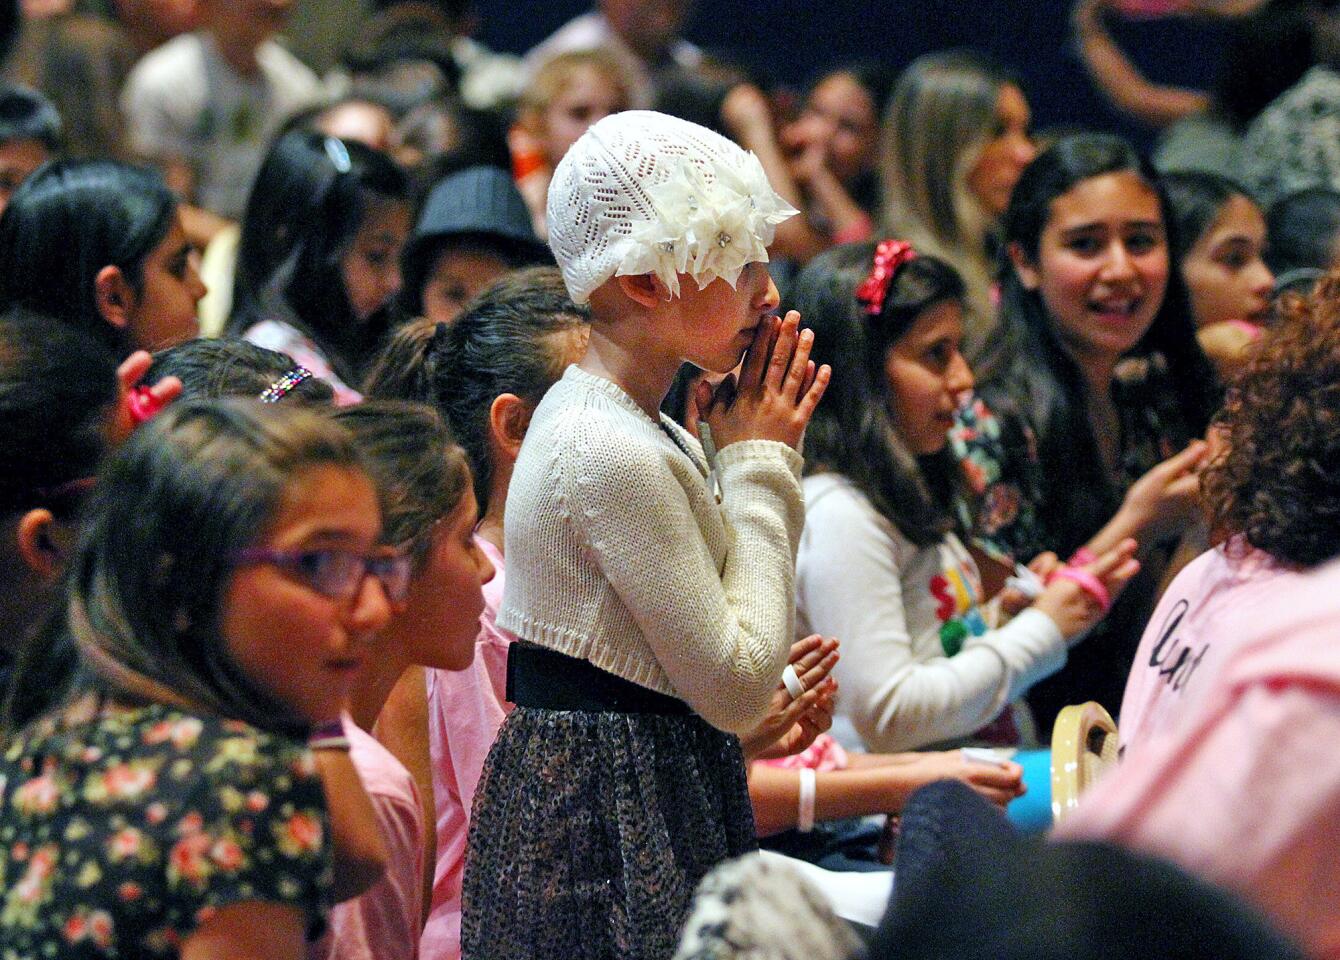 5th grader Grace Kesablak brings her hands to her face during a at the Homenetmen Ararat Chapter in Los Angeles at a benefit concert in her honor on Monday, March 24, 2014. Grace, a Chamlian Armenian School student, underwent her last treatment for cancer recently, and the benefit concert, hosted by TV host Diana Madison, included a magic act by John Gabriel, a song and dance performance by Luara Melody, and Sebu Simonian of Capital Cities who sang "Safe and Sound". Hundreds of friends and family attended the concert. (Tim Berger/Staff Photographer)